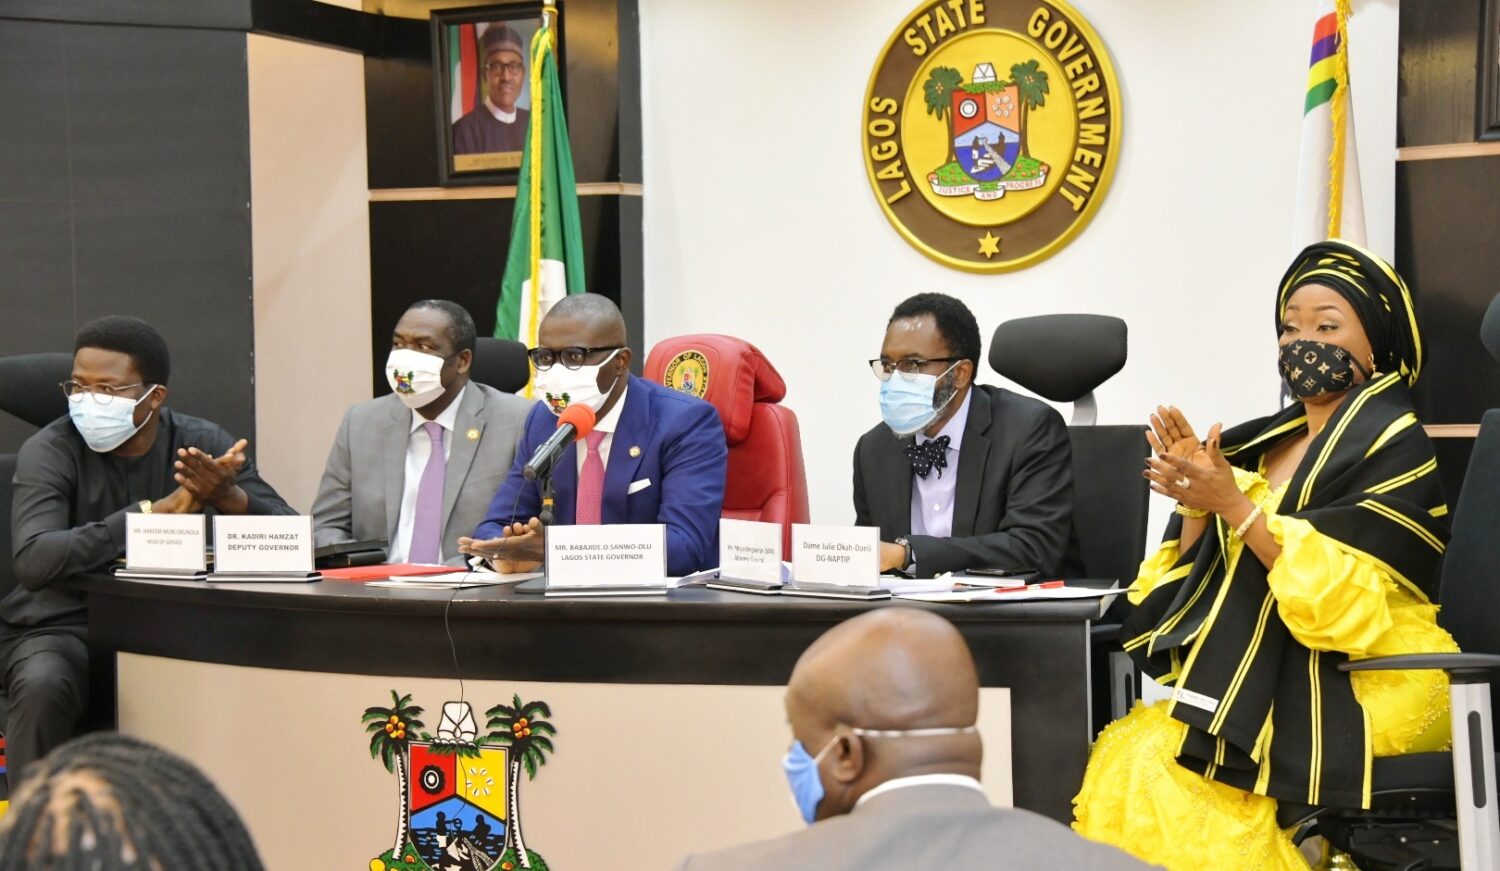 L-R: Lagos State Head of Service, Mr. Hakeem Muri-Okunola; Deputy Governor, Dr. Obafemi Hamzat; Governor Babajide Sanwo-Olu; Attorney General and Chairman, State Task Force on Human Trafficking, Mr. Moyosore Onigbanjo (SAN) and Director General, National Agency for the Prohibition of Trafficking in Persons (NAPTIP), Mrs. Julie Okah-Donli during the inauguration of the Lagos Task Force on Human Trafficking, at Lagos House, Alausa, Ikeja, on Tuesday, September 8, 2020.